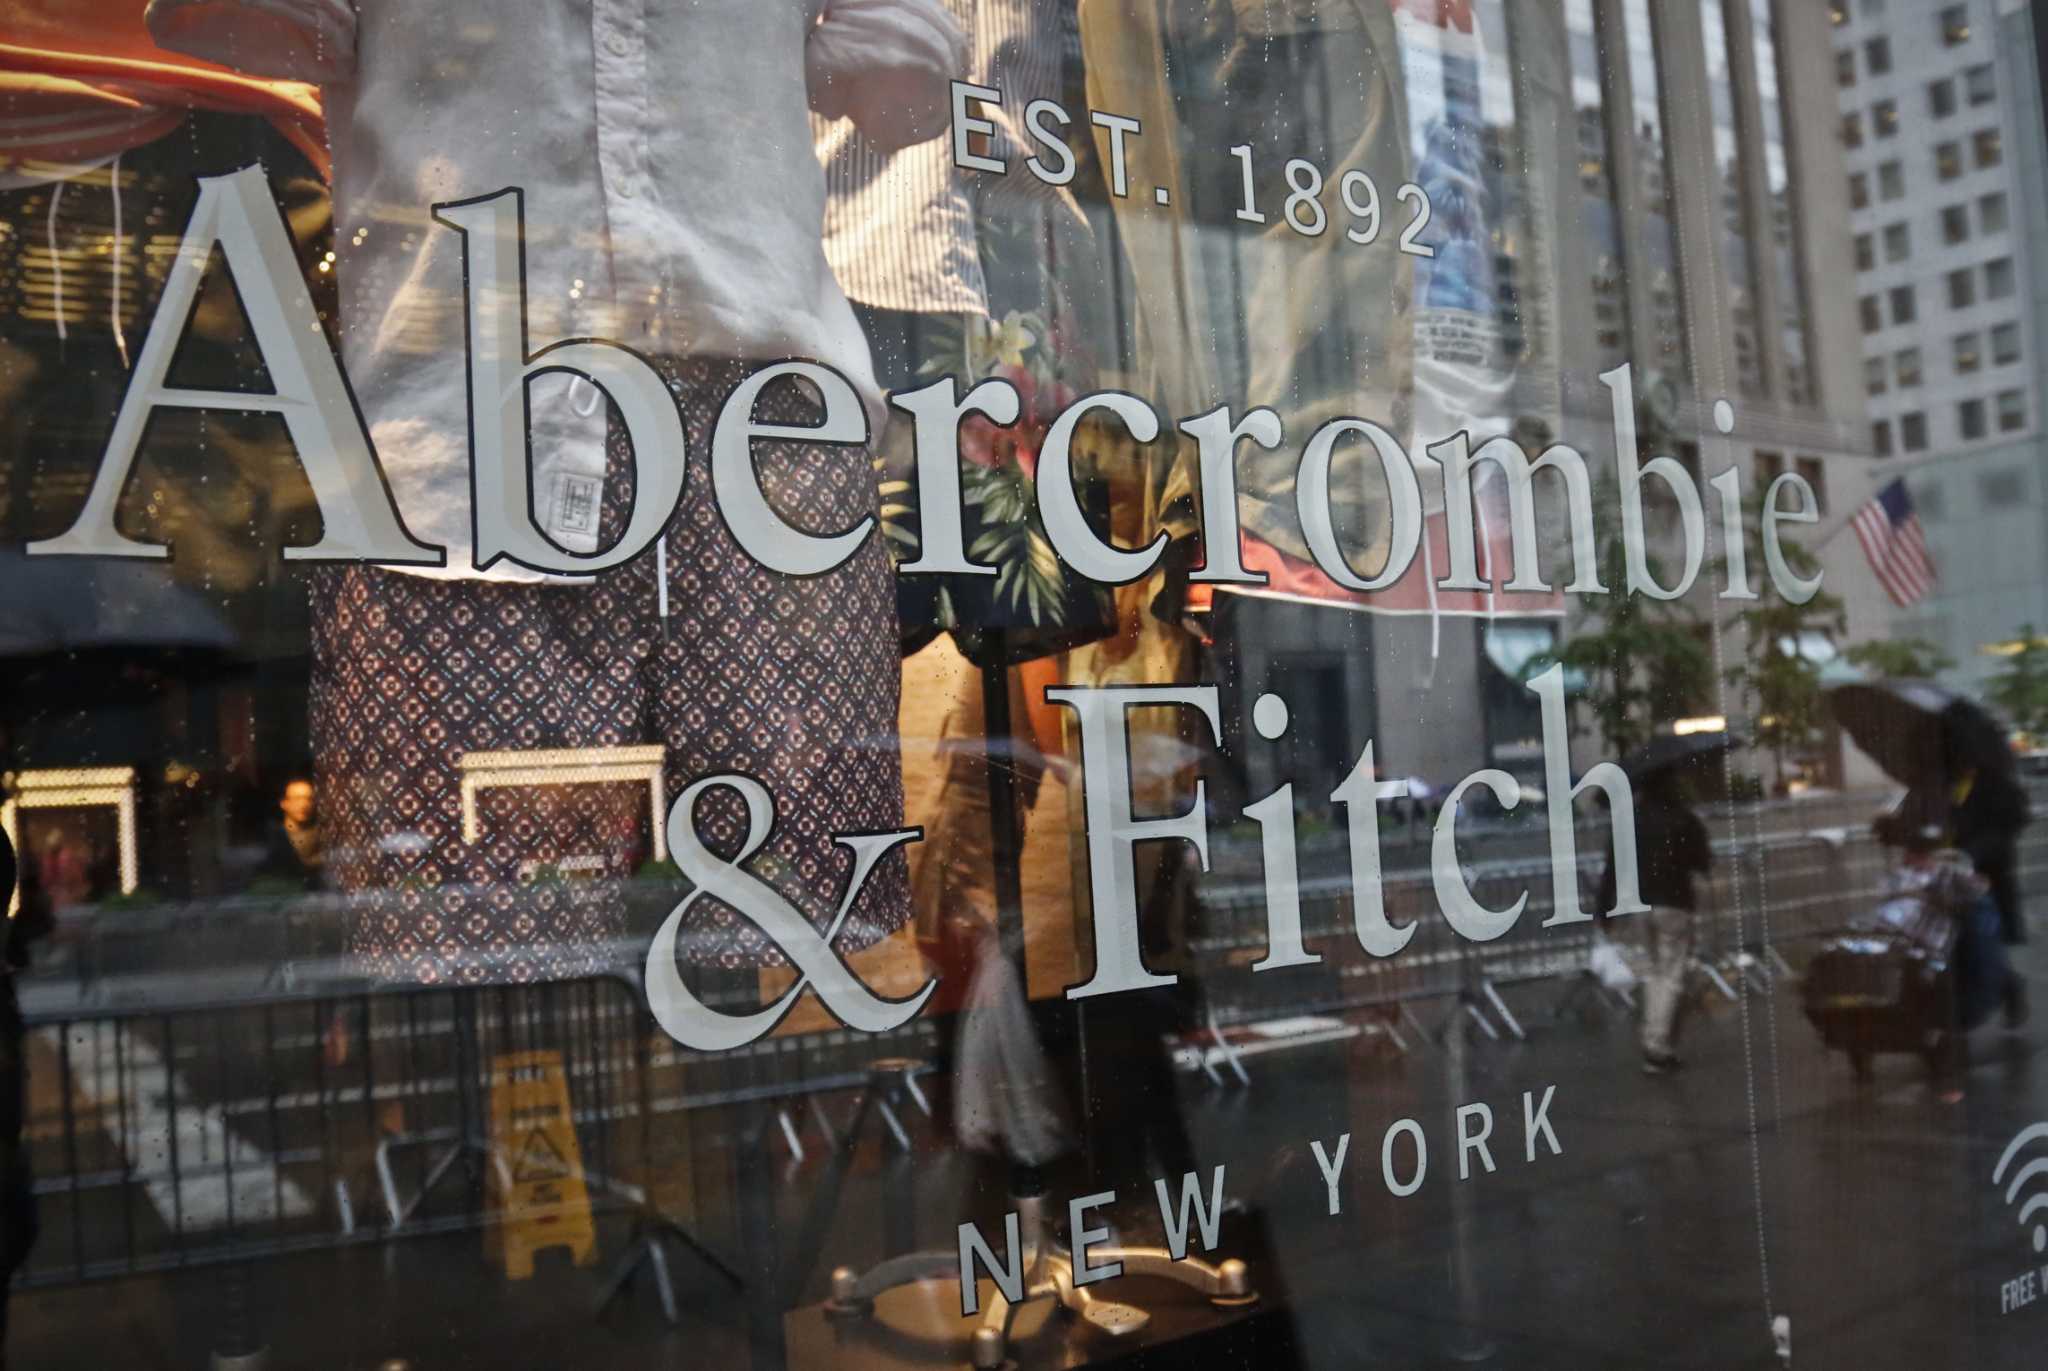 Abercrombie, Hollister stores at 